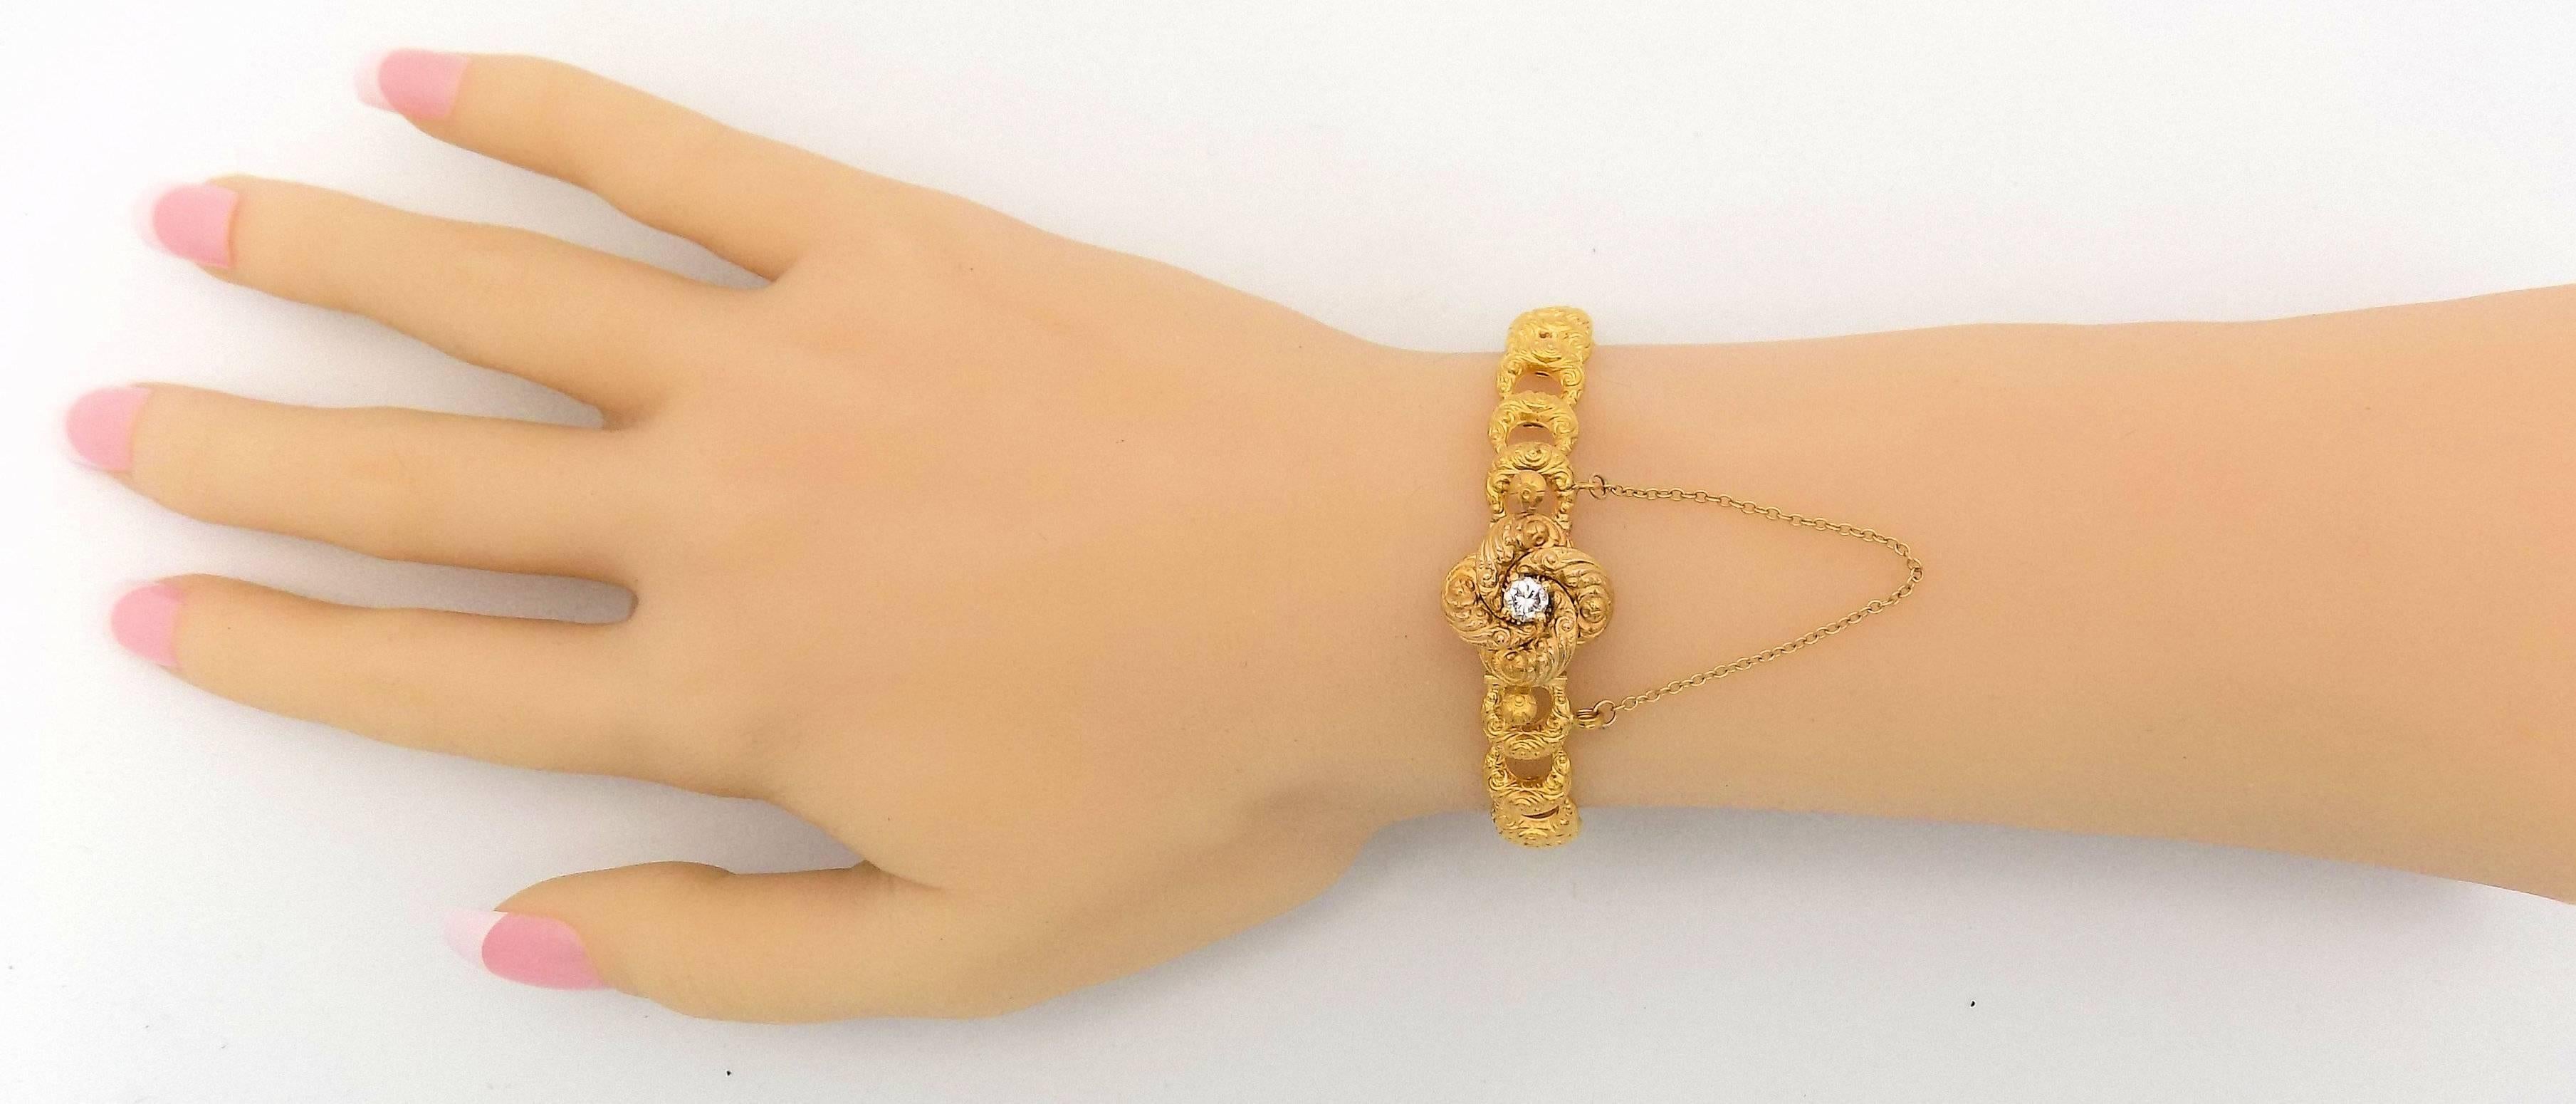 14 Karat yellow gold crescent link bracelet with center diamond.  Manufactured by Krementz, a firm that was in business a hundred years ago.  They were best known for gentlemen's accessory jewelry.  

This lovely bracelet is heavily repoussed